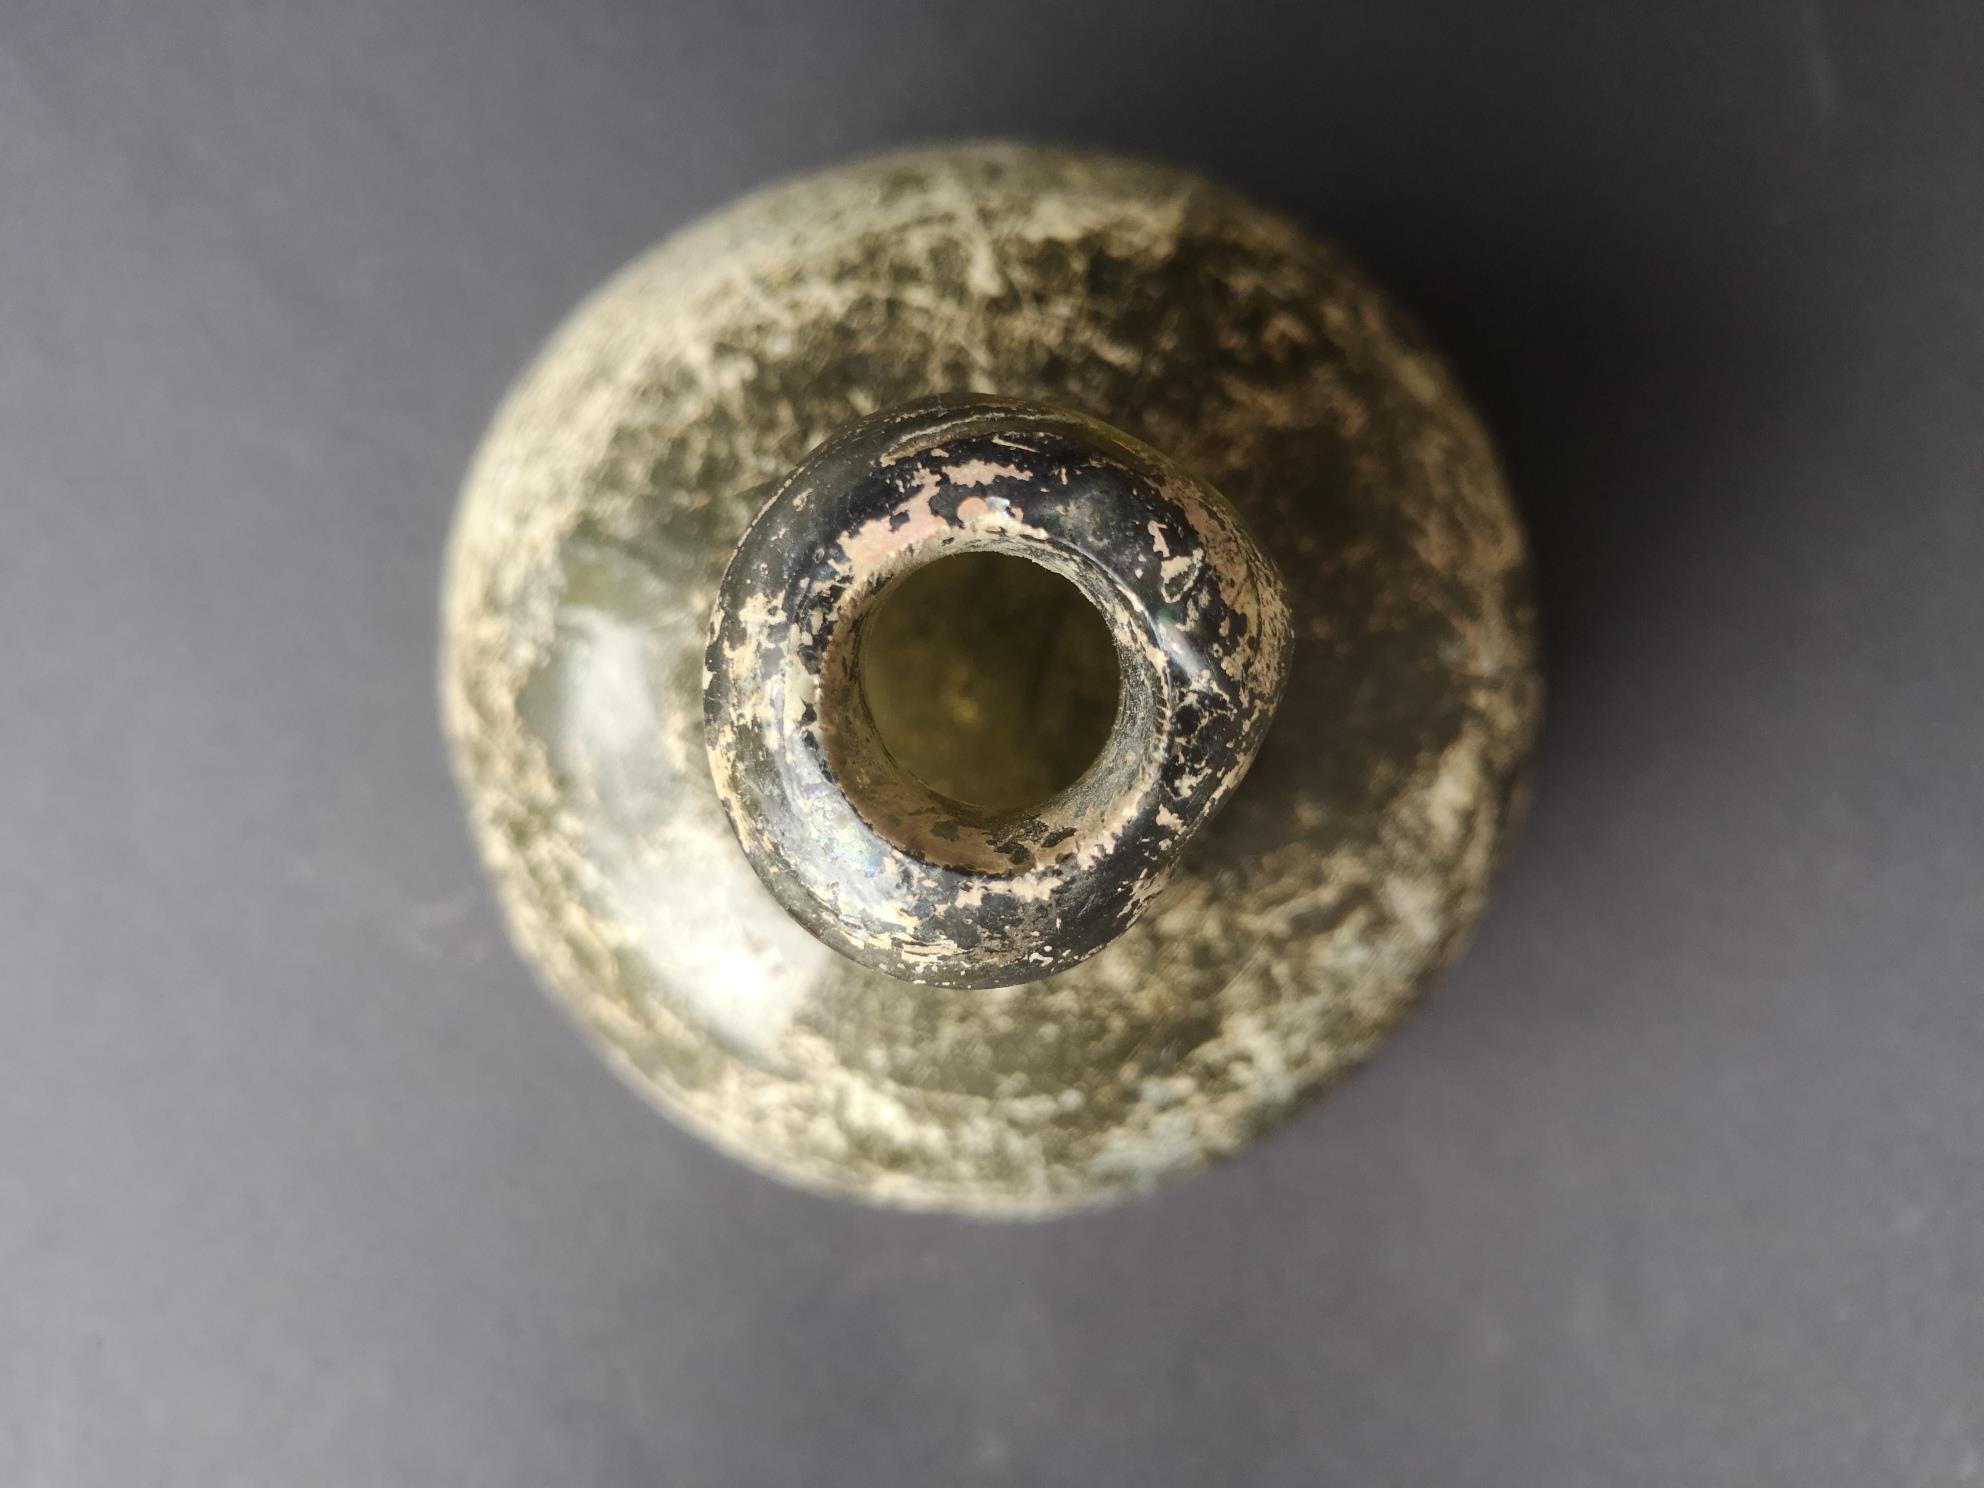 An antique onion shaped glass wine bottle, 6.4" high - crack to side. - Image 3 of 5